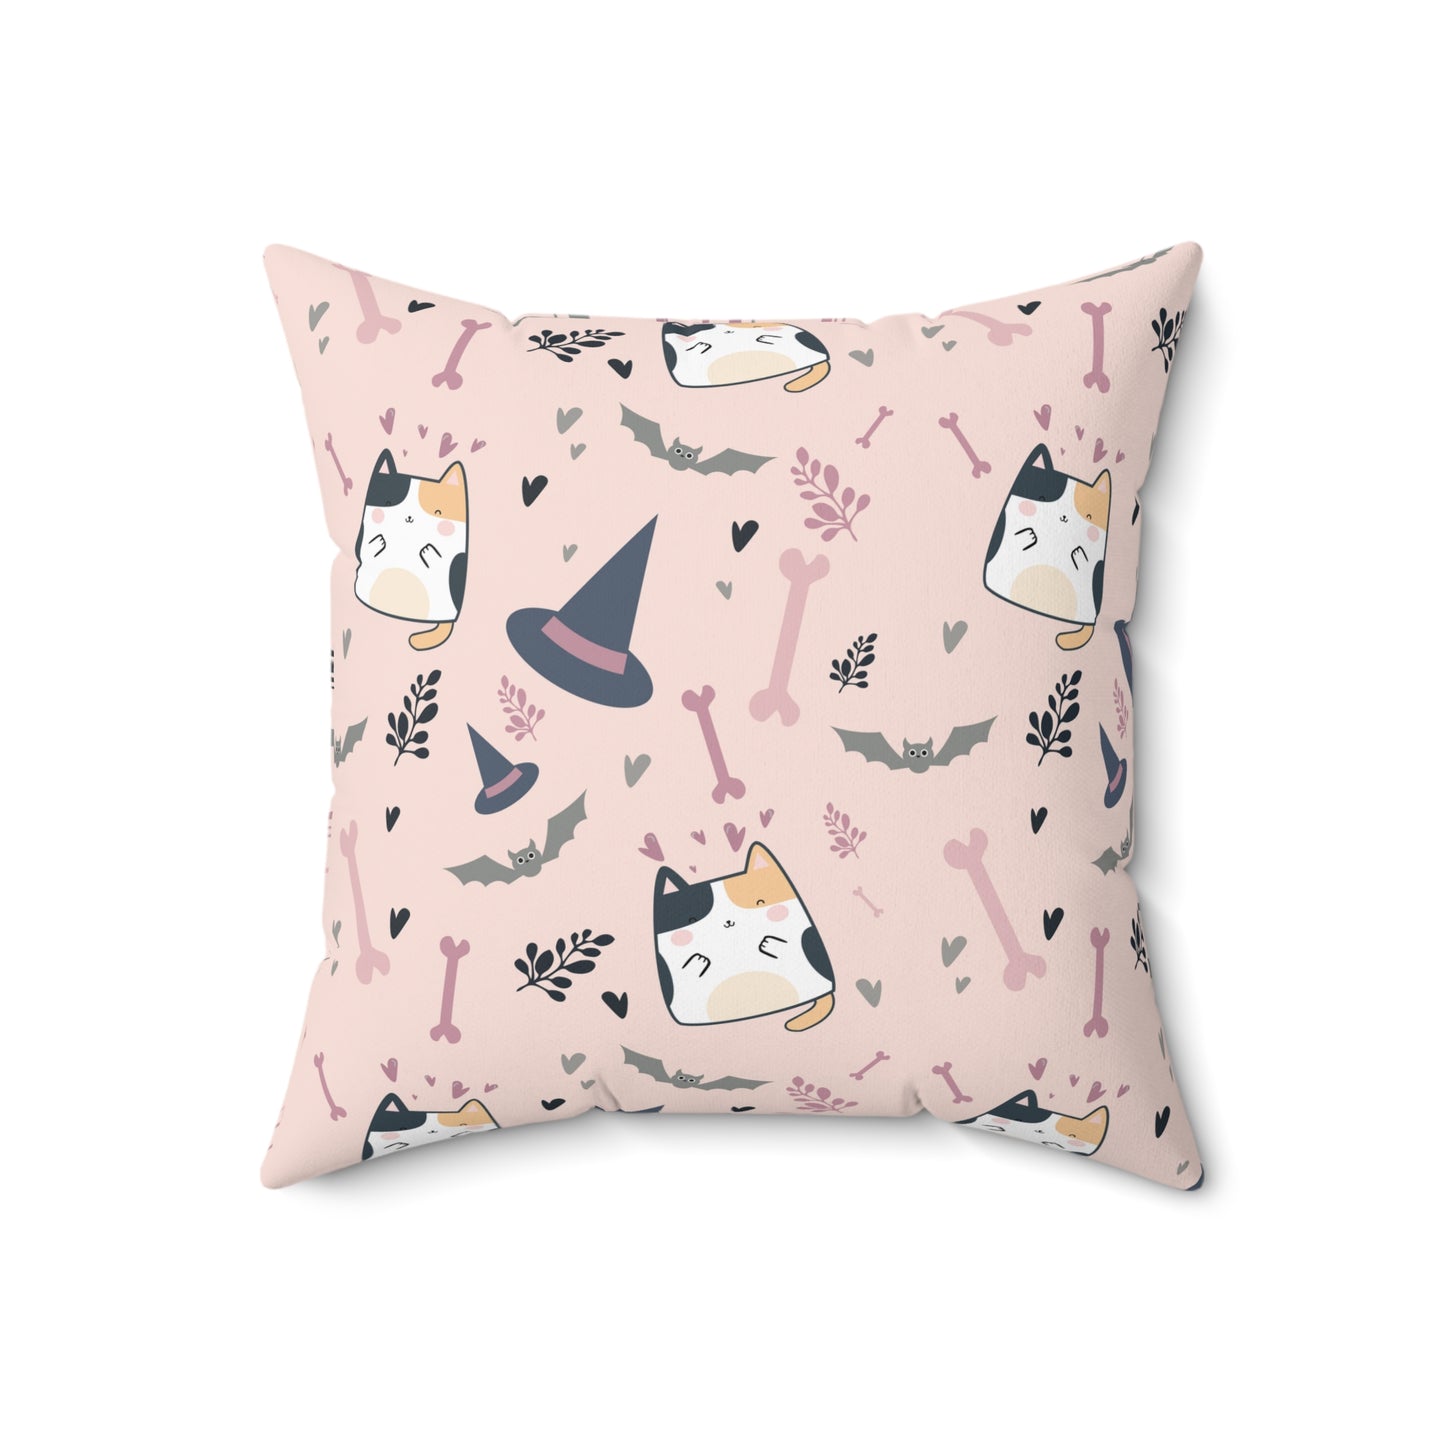 Halloween Cats and Bats Spun Polyester Square Pillow with Insert